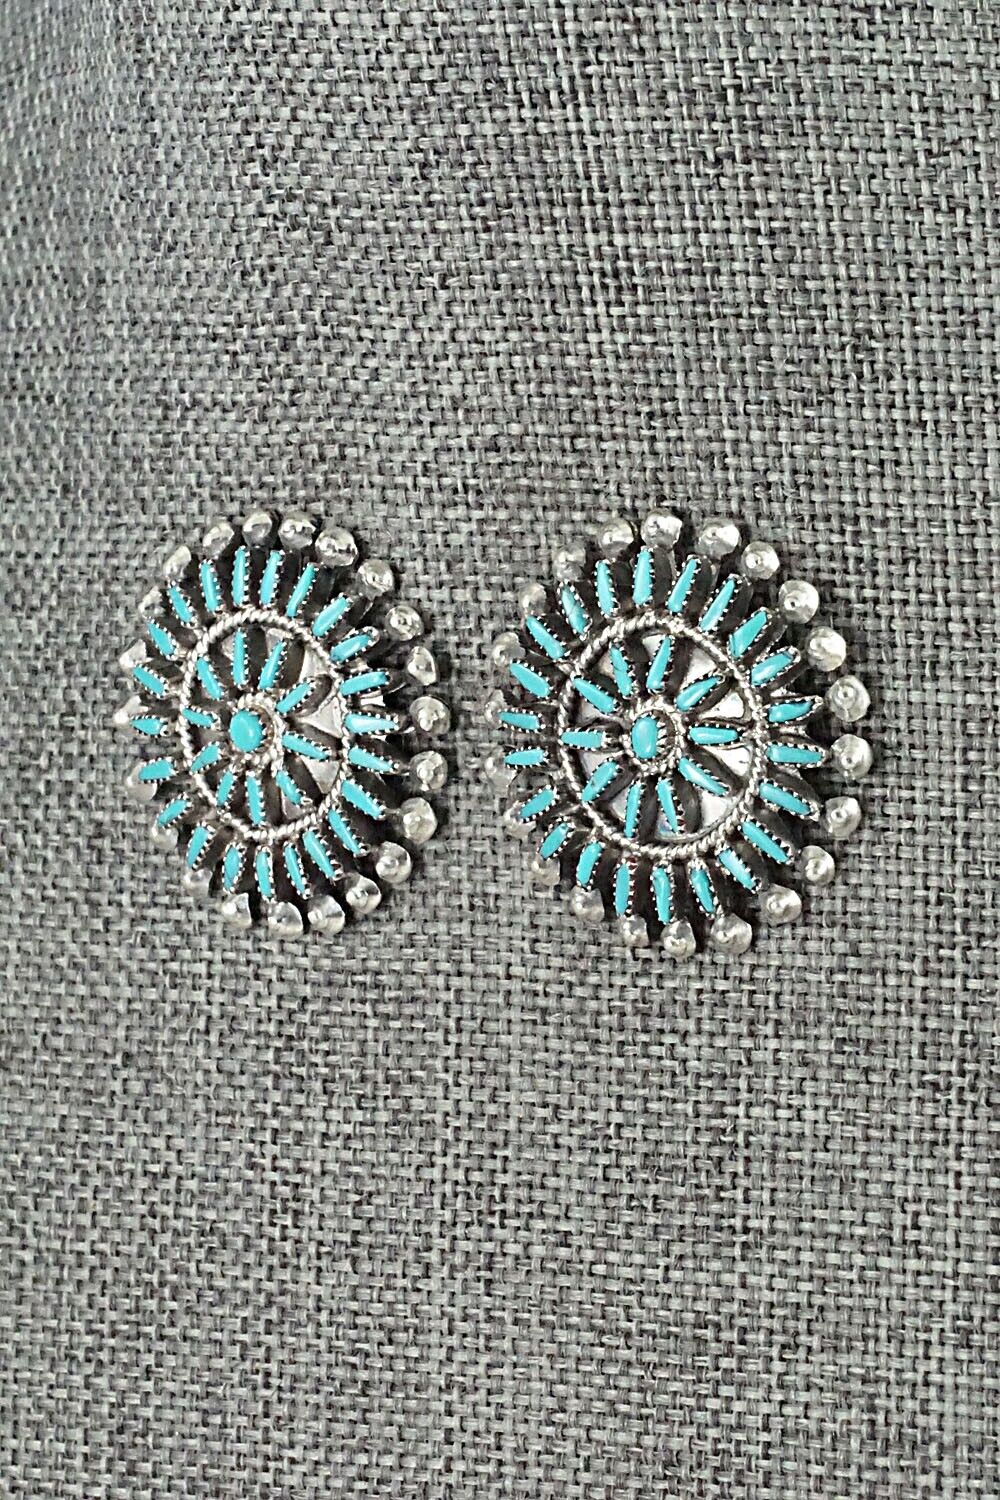 Turquoise & Sterling Silver Earrings - Vincent Johnson